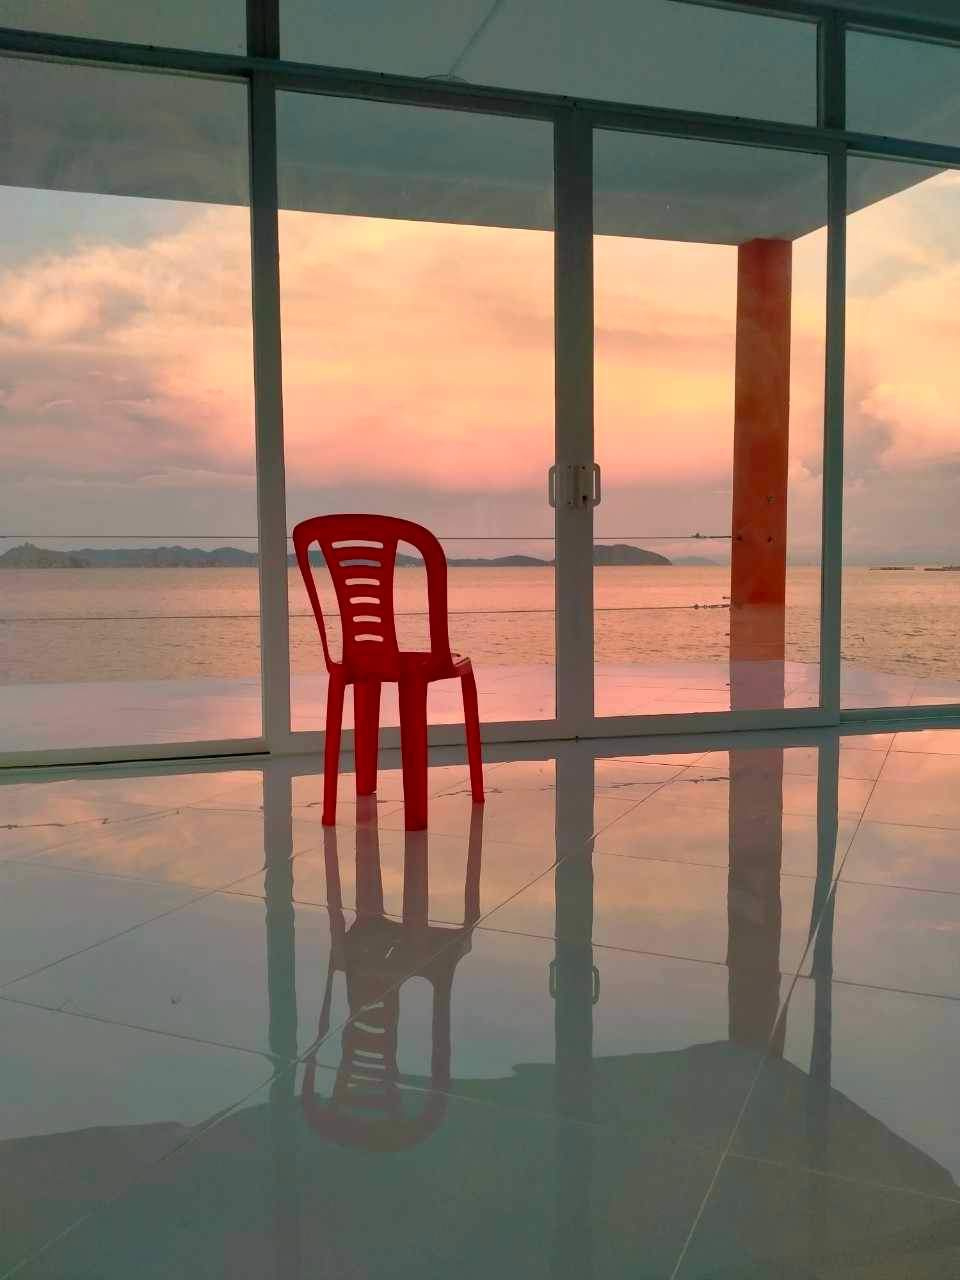 A red plastic chair sits in front of a large glass window with a view of the ocean and distant islands at sunset. The tiled floor reflects the chair and the soft hues of the sky.